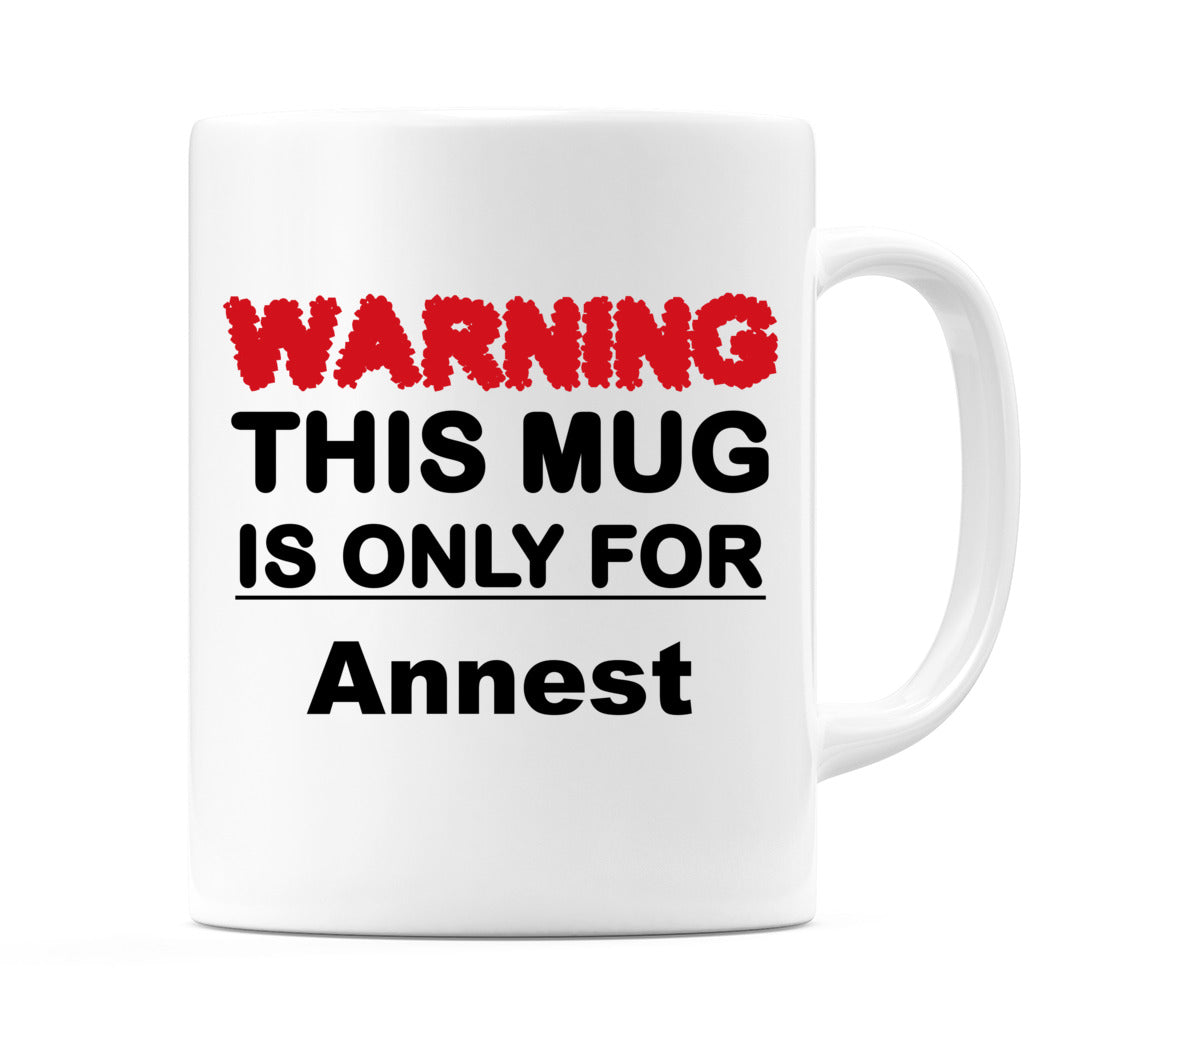 Warning This Mug is ONLY for Annest Mug